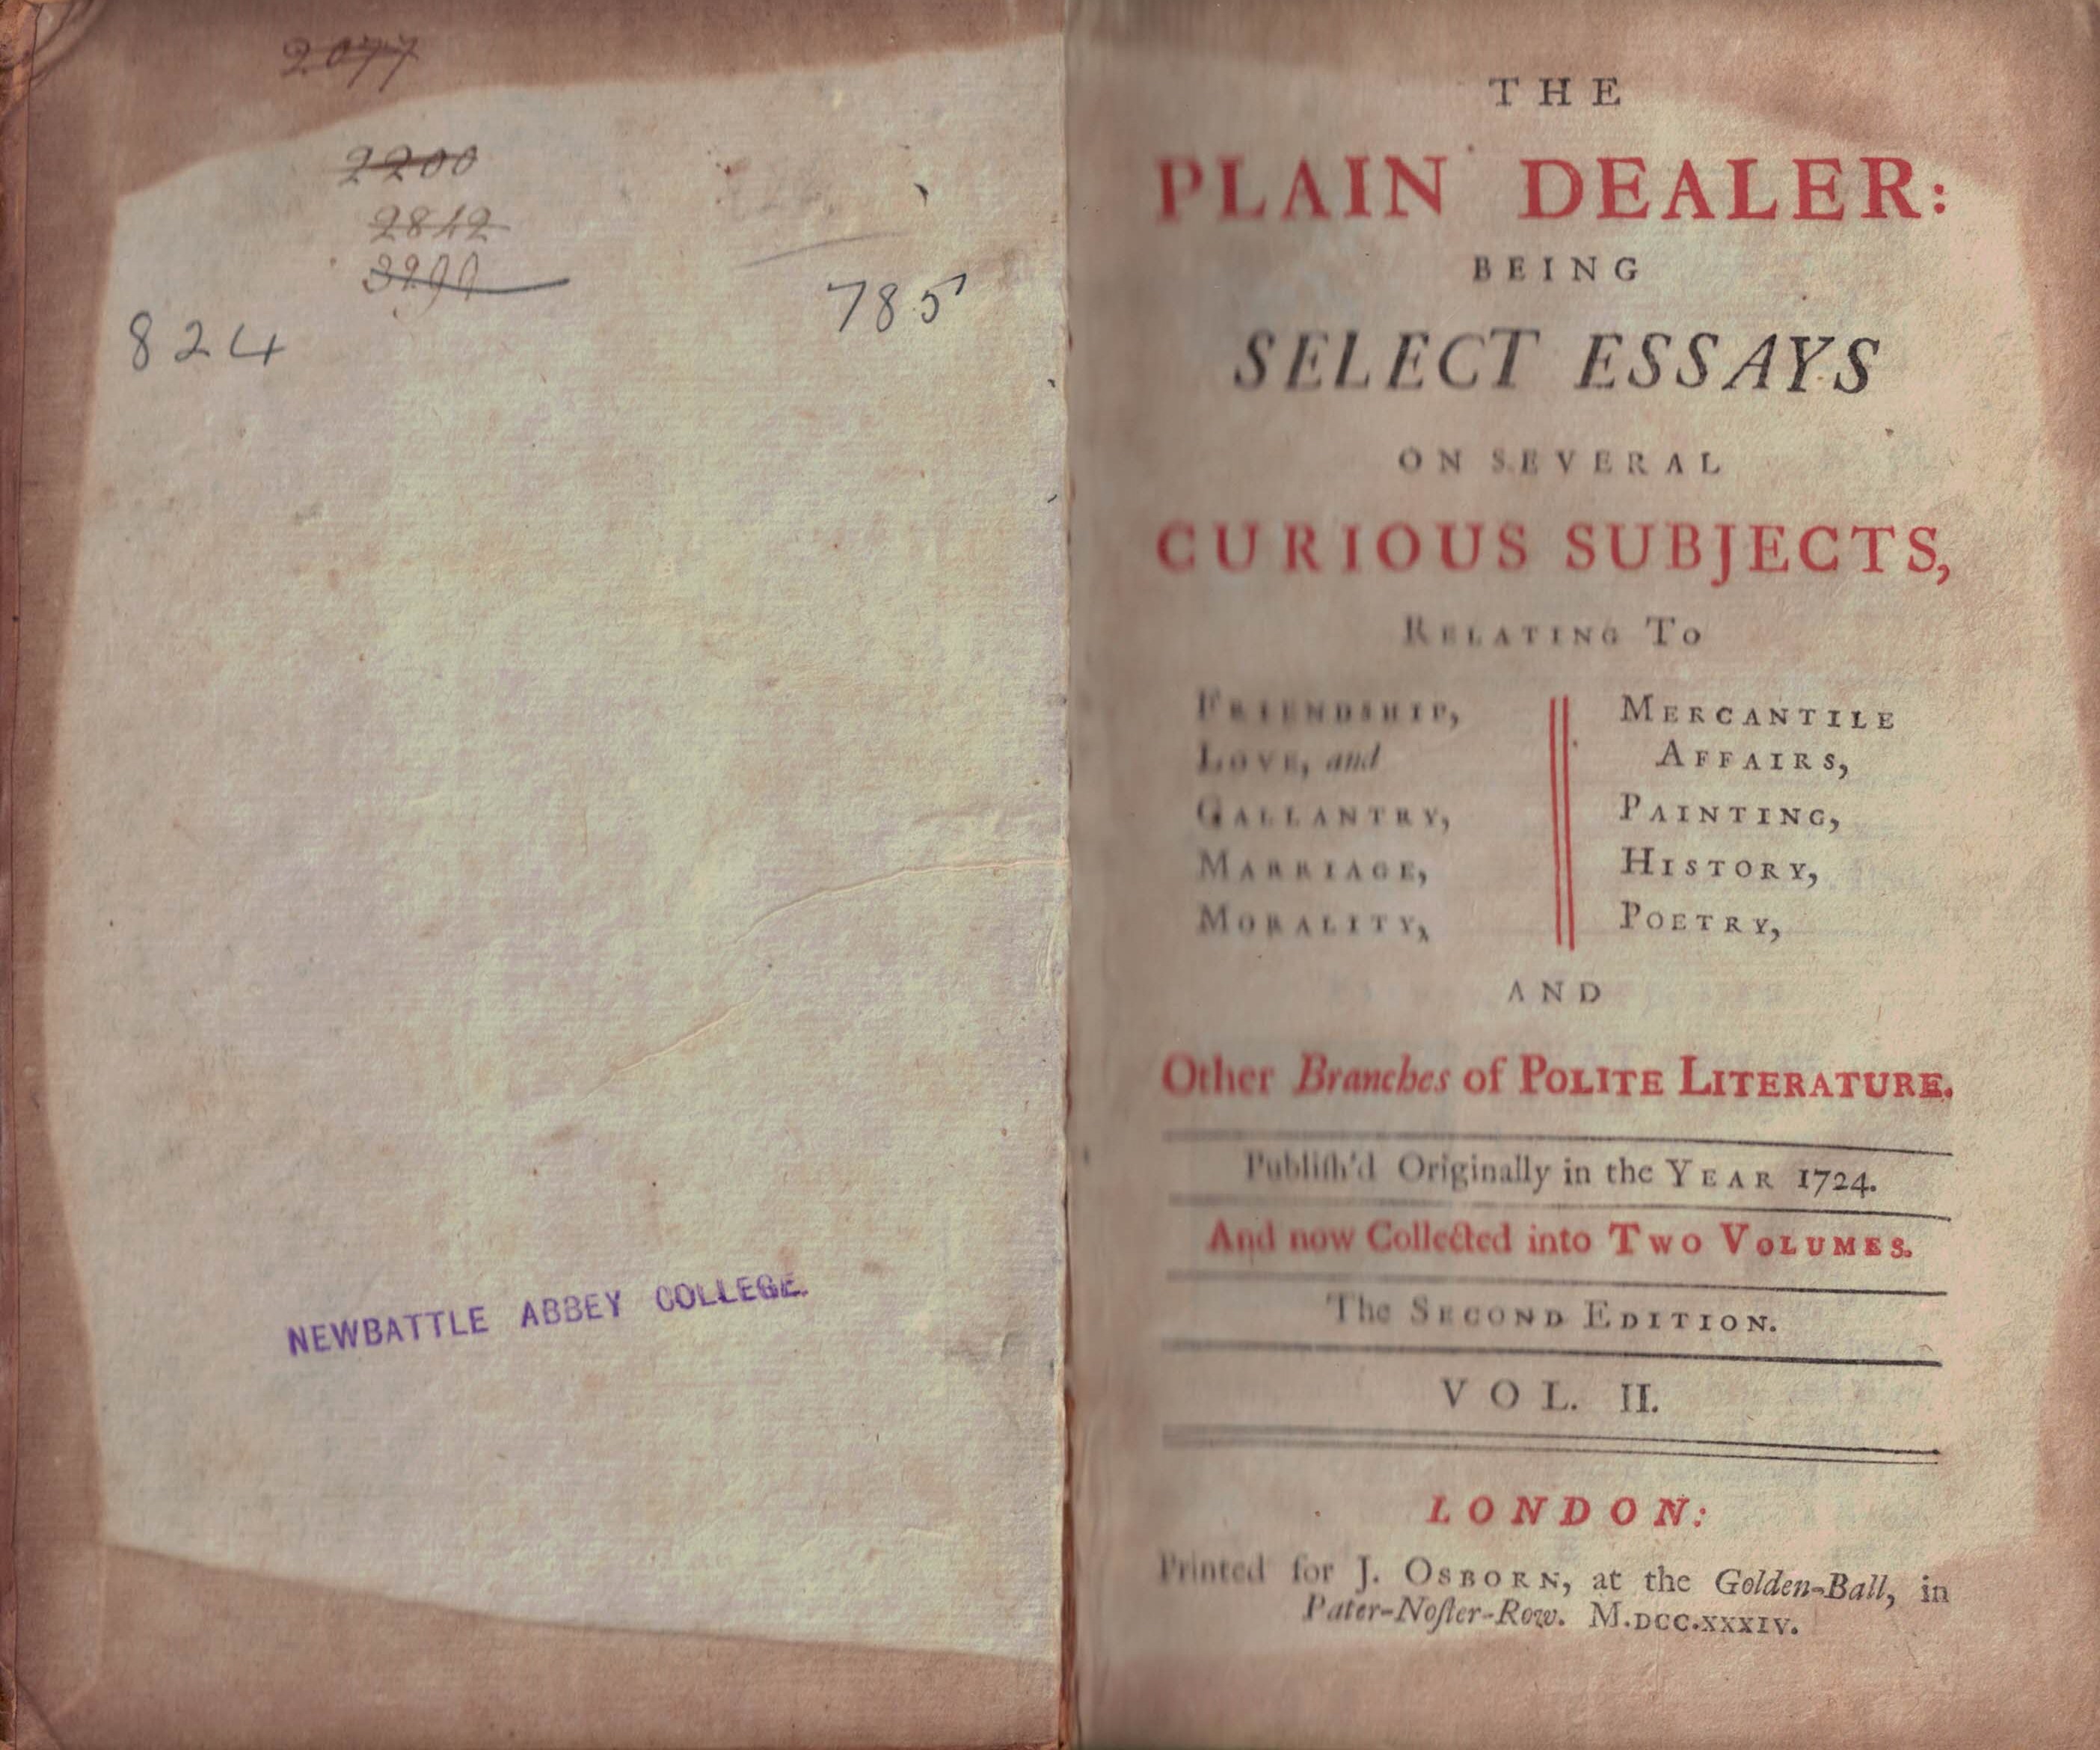 The Plain Dealer: Being Select Essays on Several Curious Subjects, Relating to Friendship, Love, and Gallantry, Marriage, Morality, Mercantile Affairs, Painting, History, Poetry, and Other Branches of Polite Literature. Volume II.